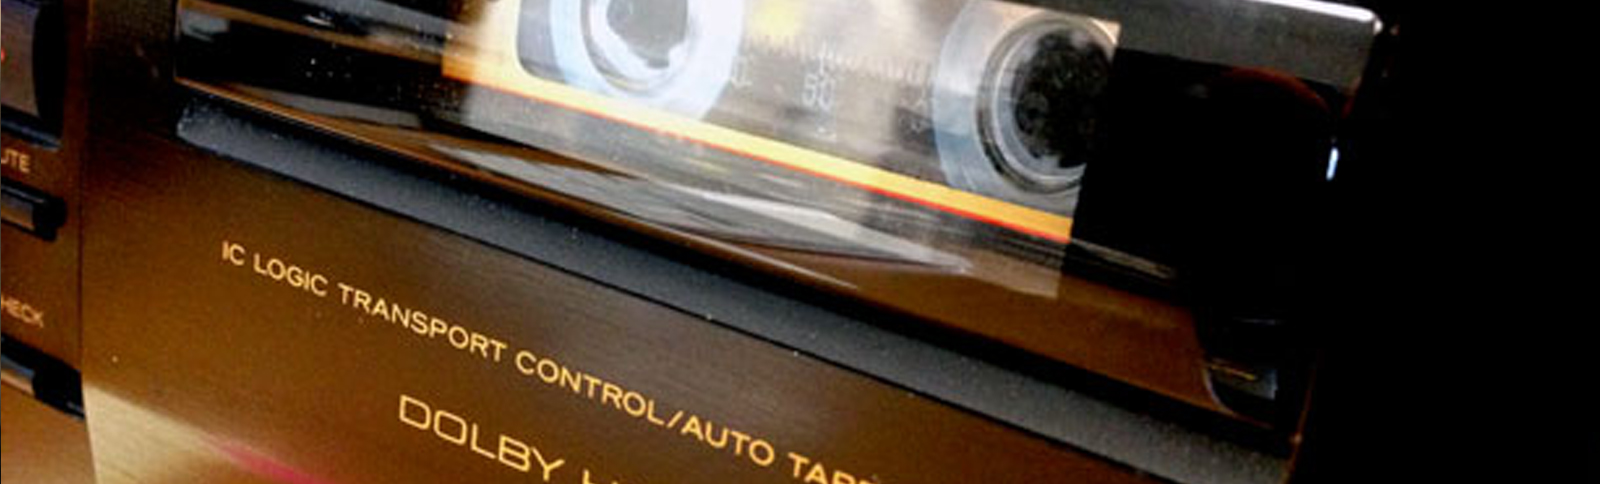 How to Convert Cassettes to MP3 & Other Digital Formats